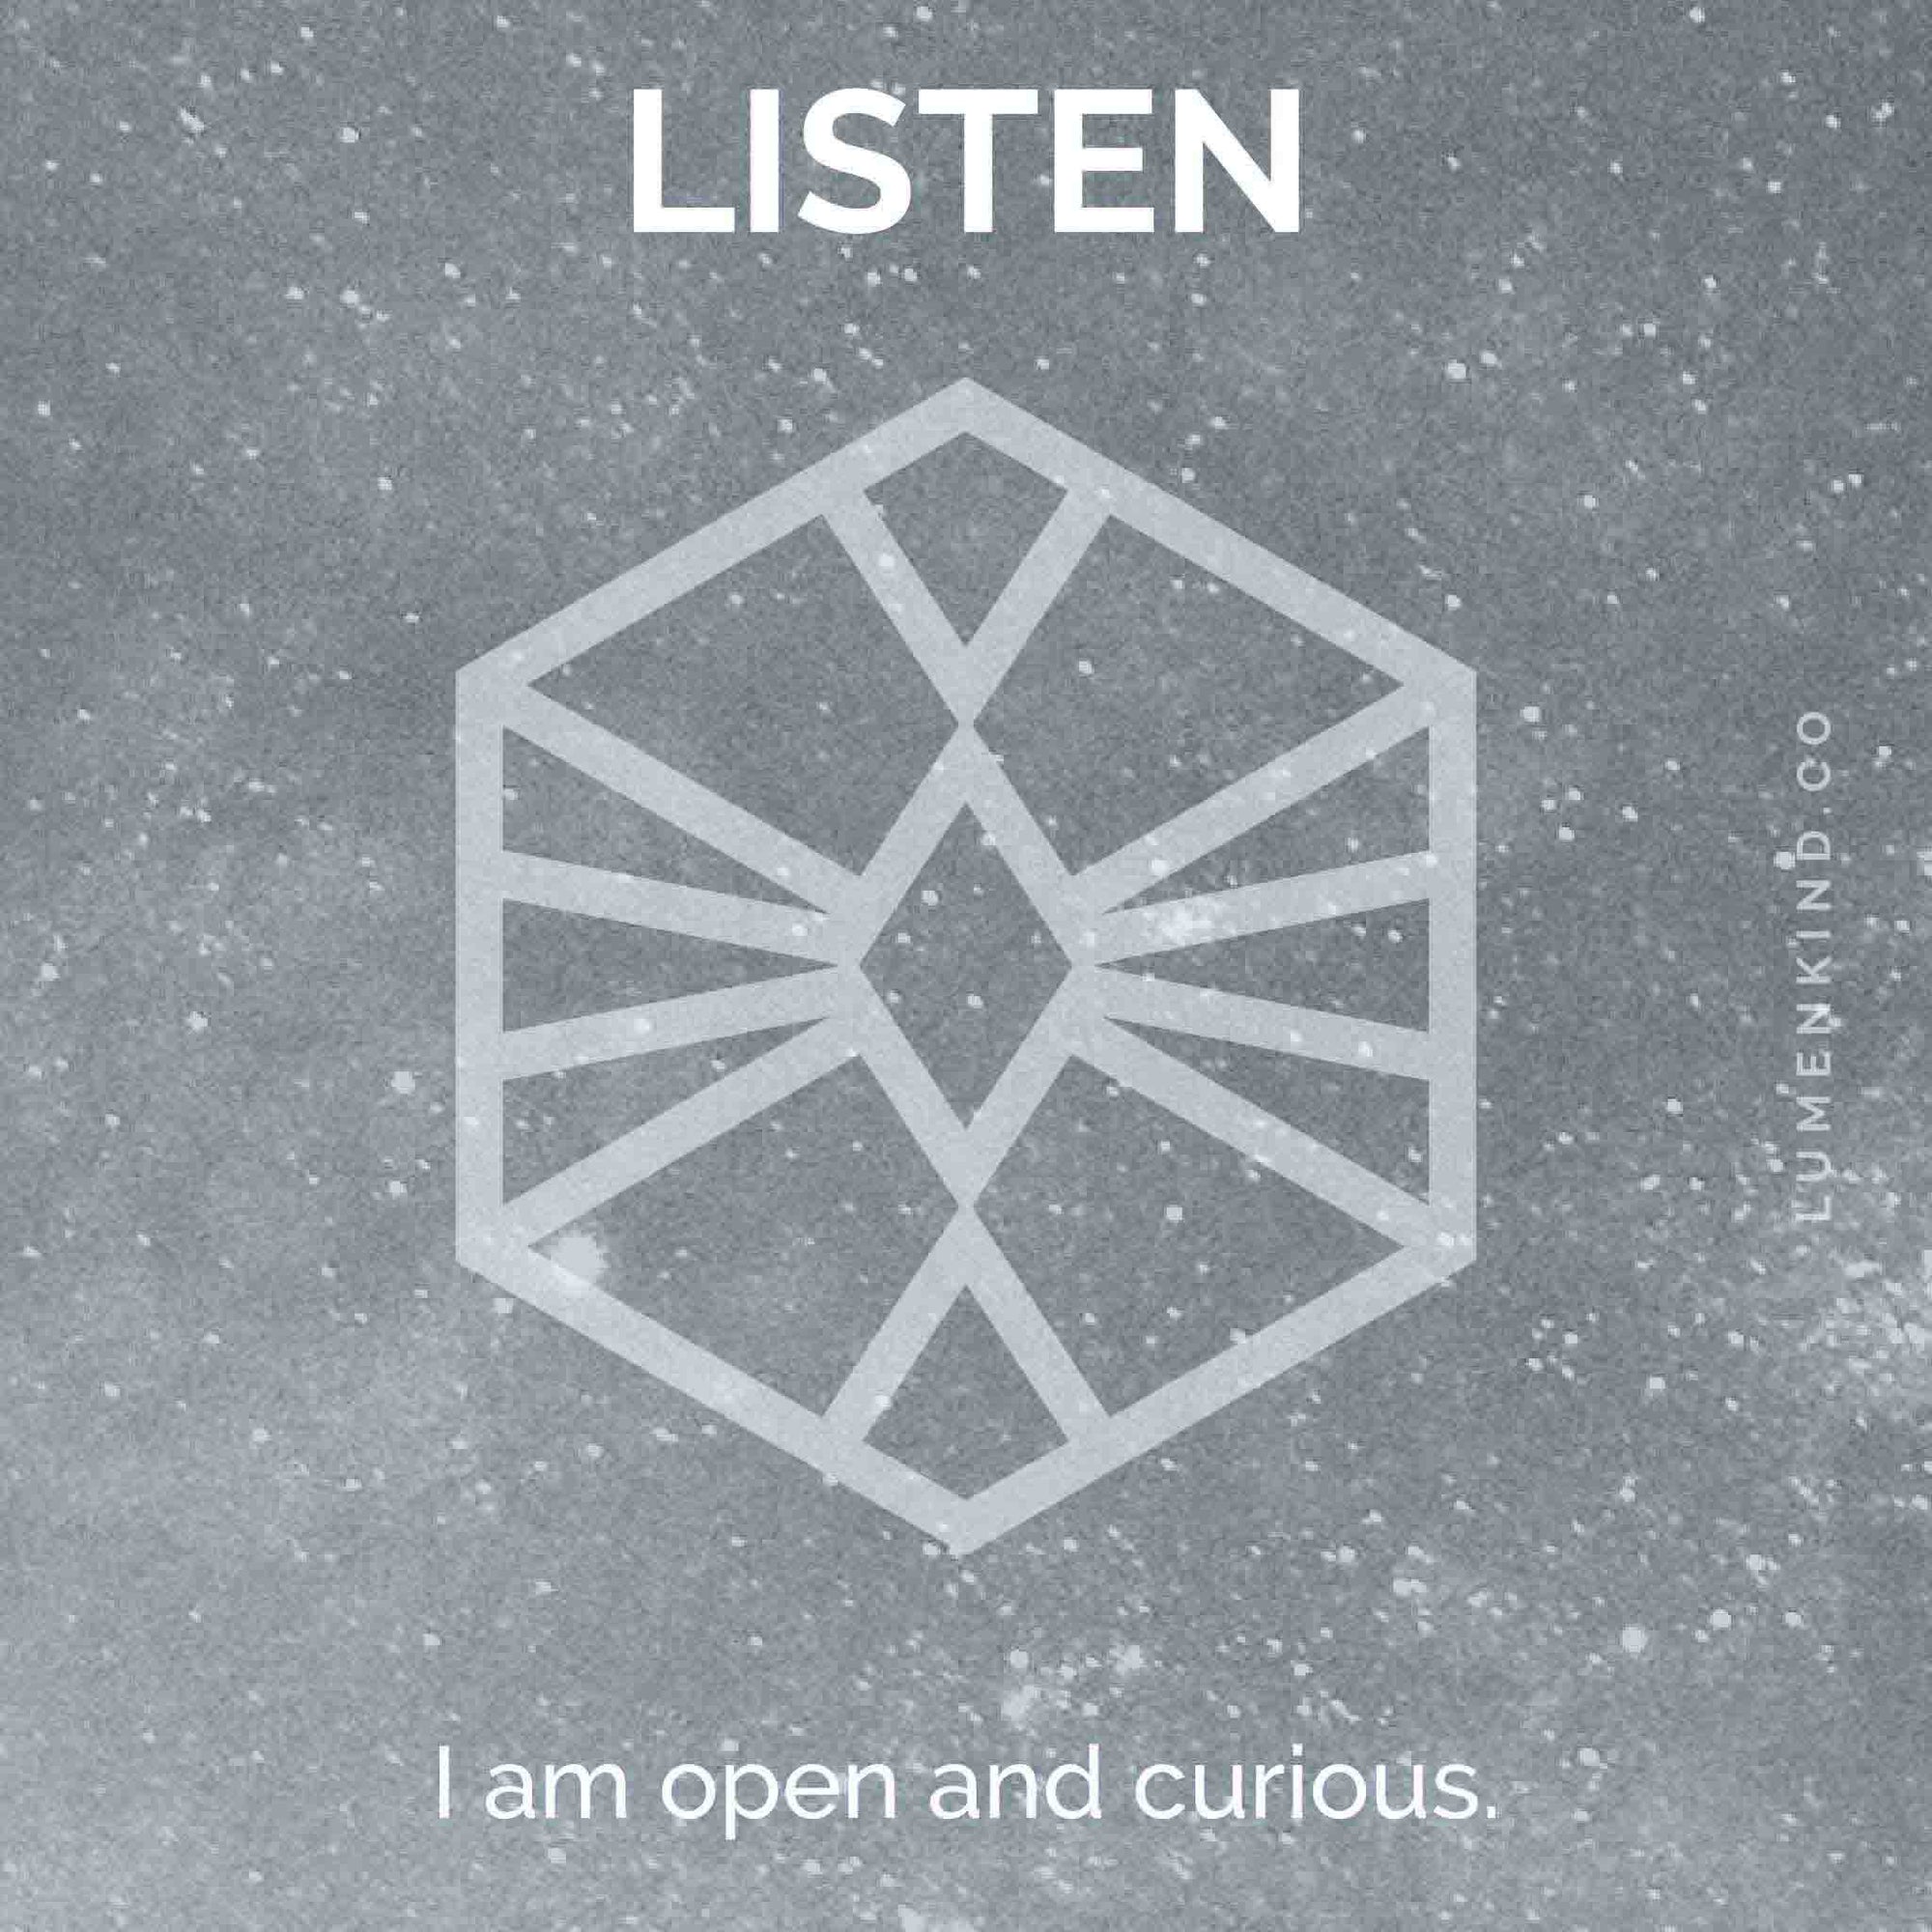 The suggested intention is LISTEN. I am open and curious.